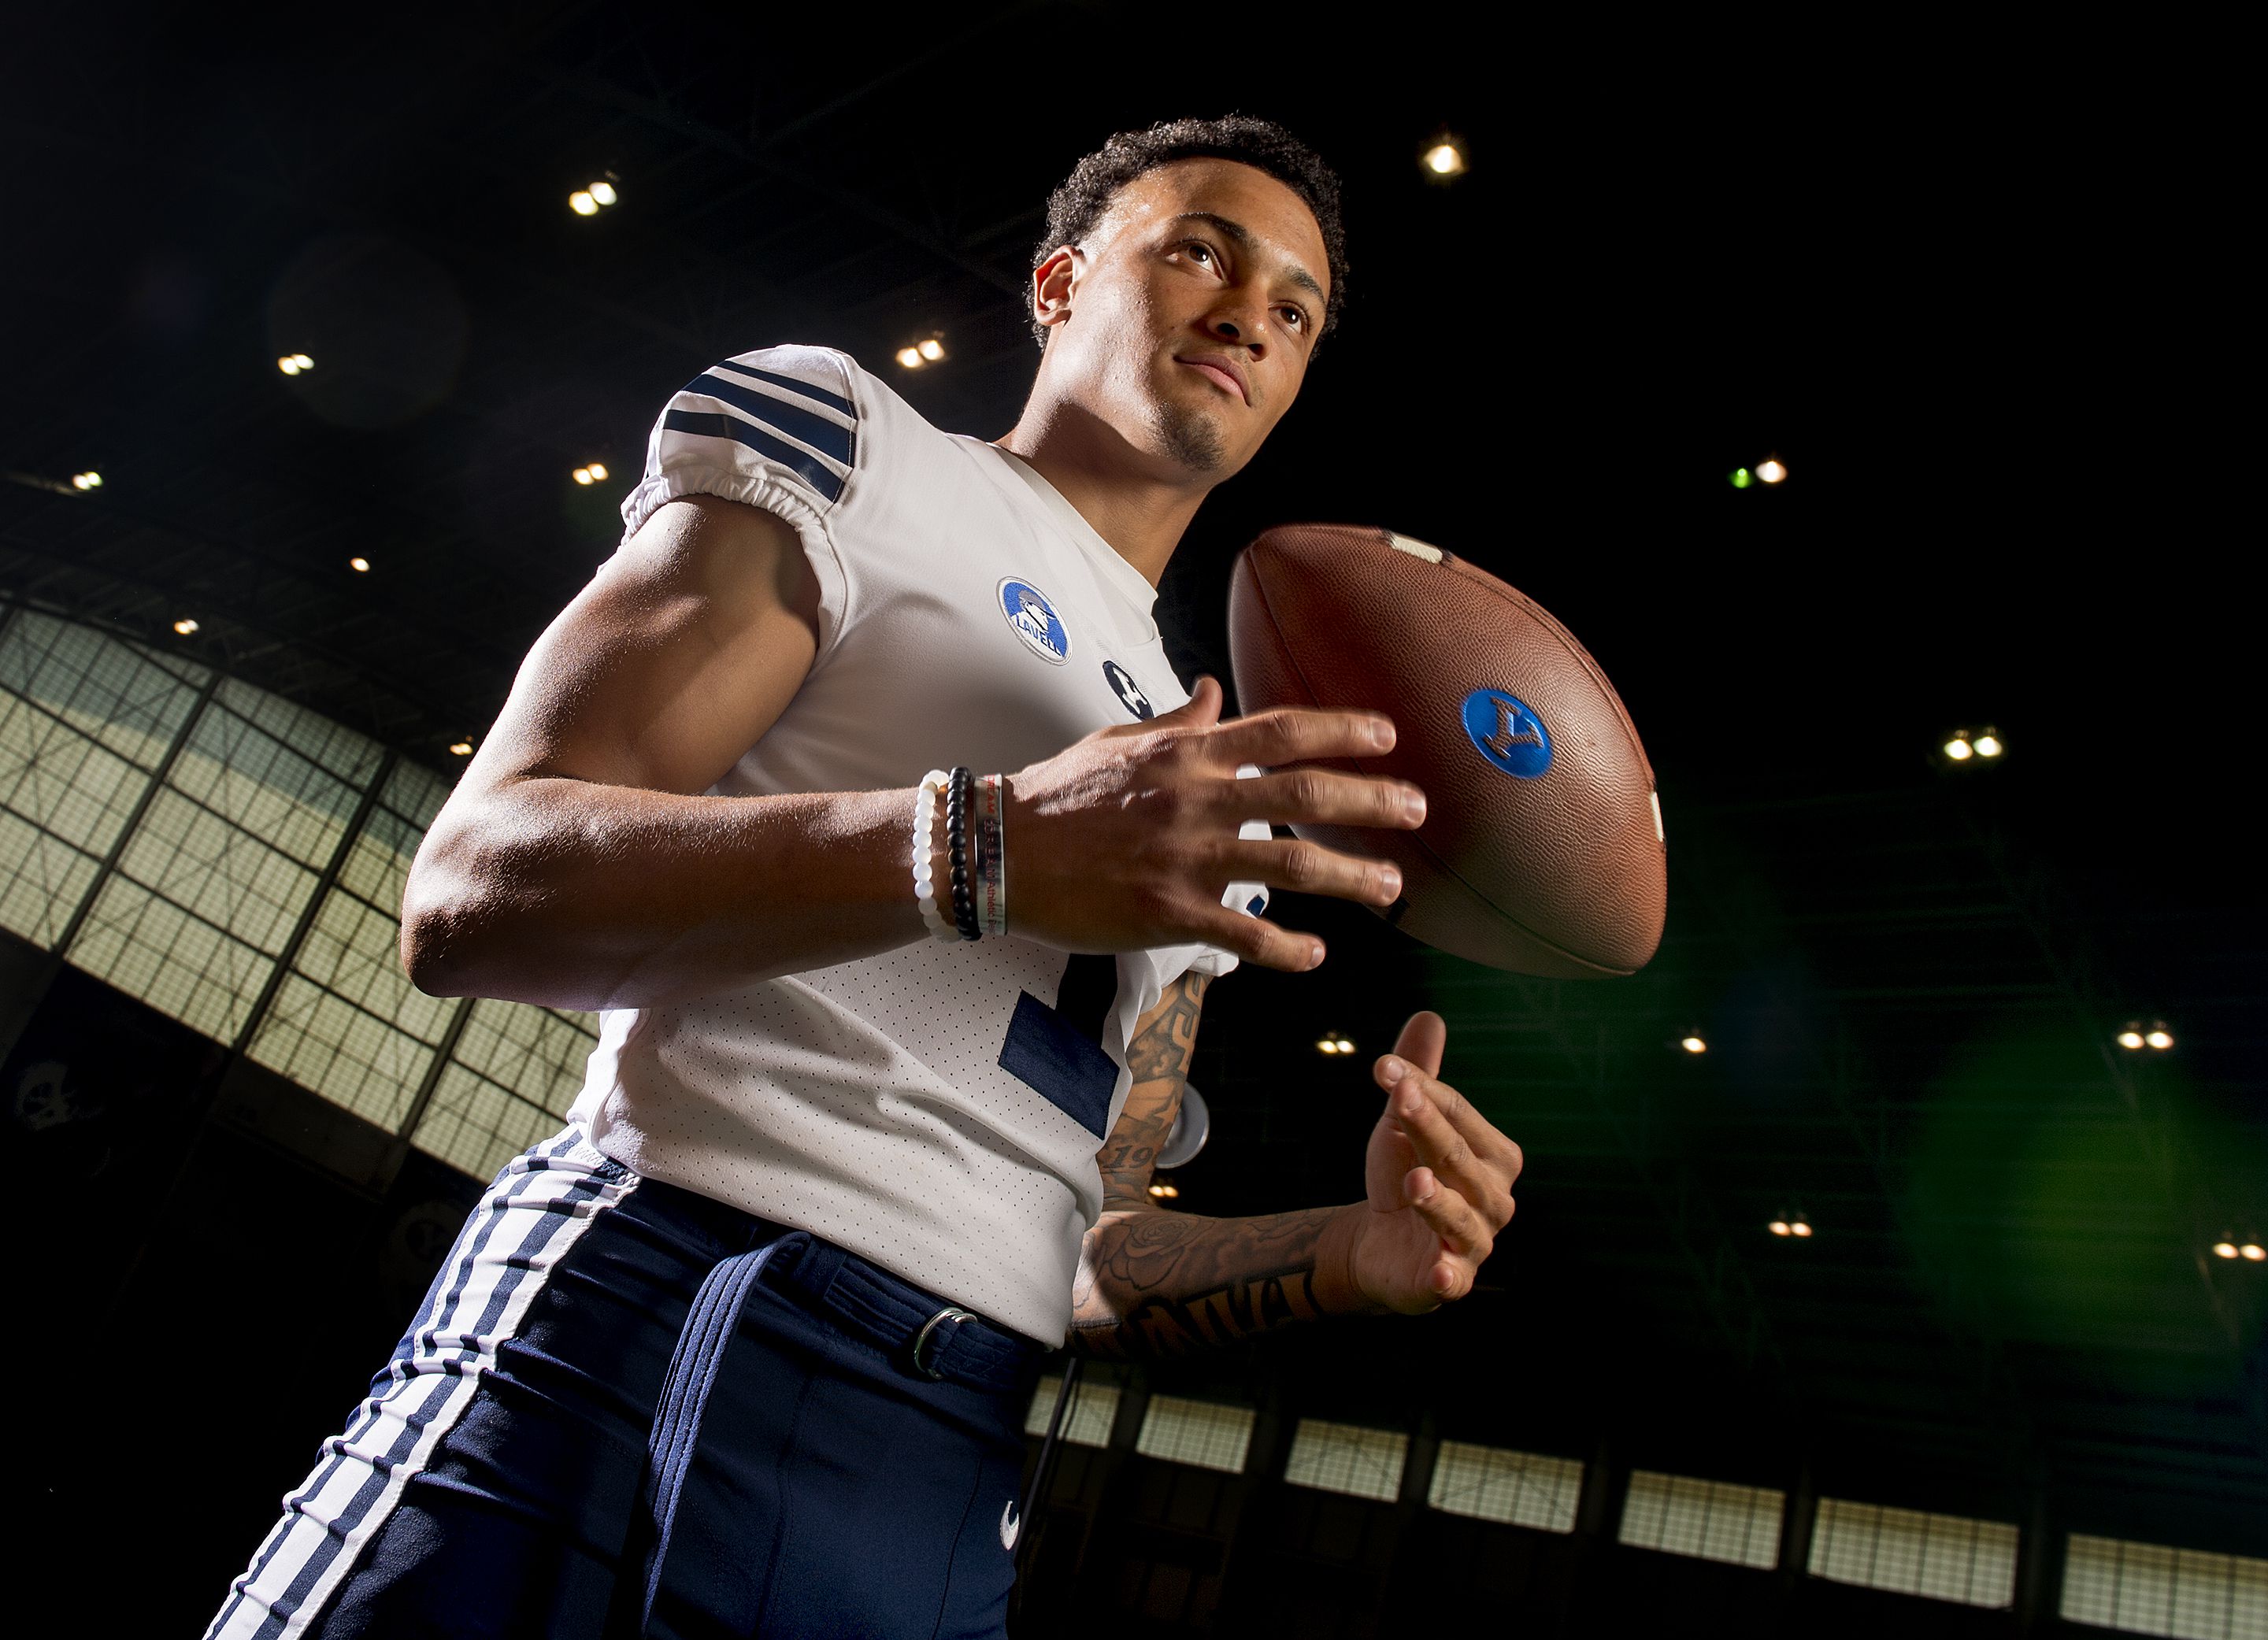 BYU's first game of season, on Labor Day, to be broadcast on ESPN